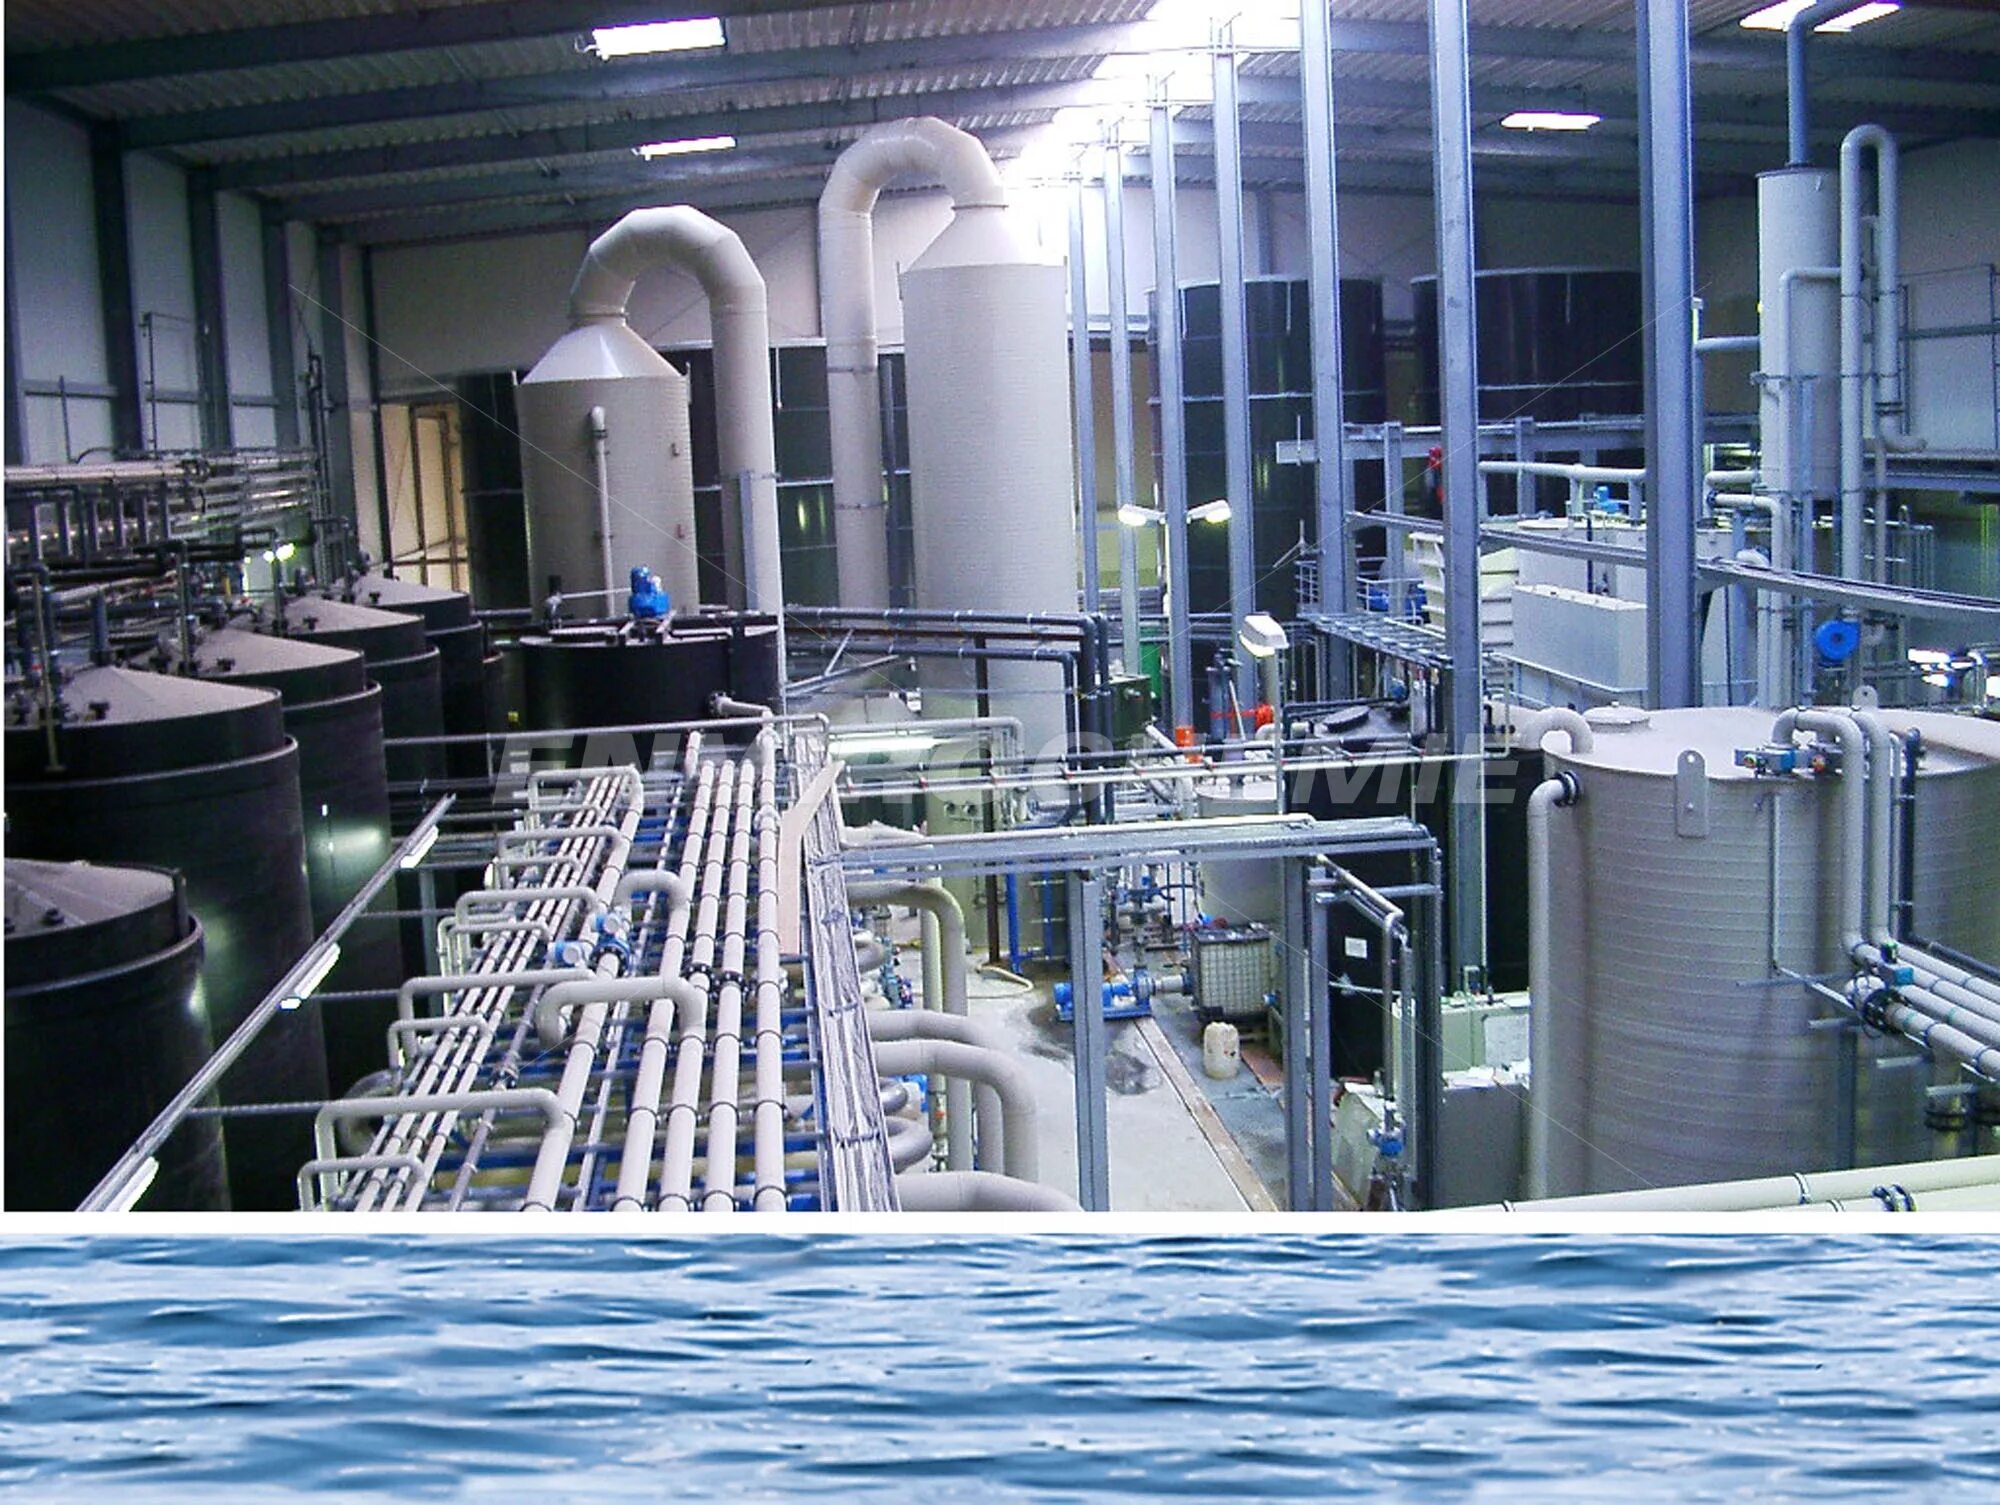 Industrial Wastewater treatment Plant. Effluent treatment Plant. Industrial Water treatment. Water treatment Systems.